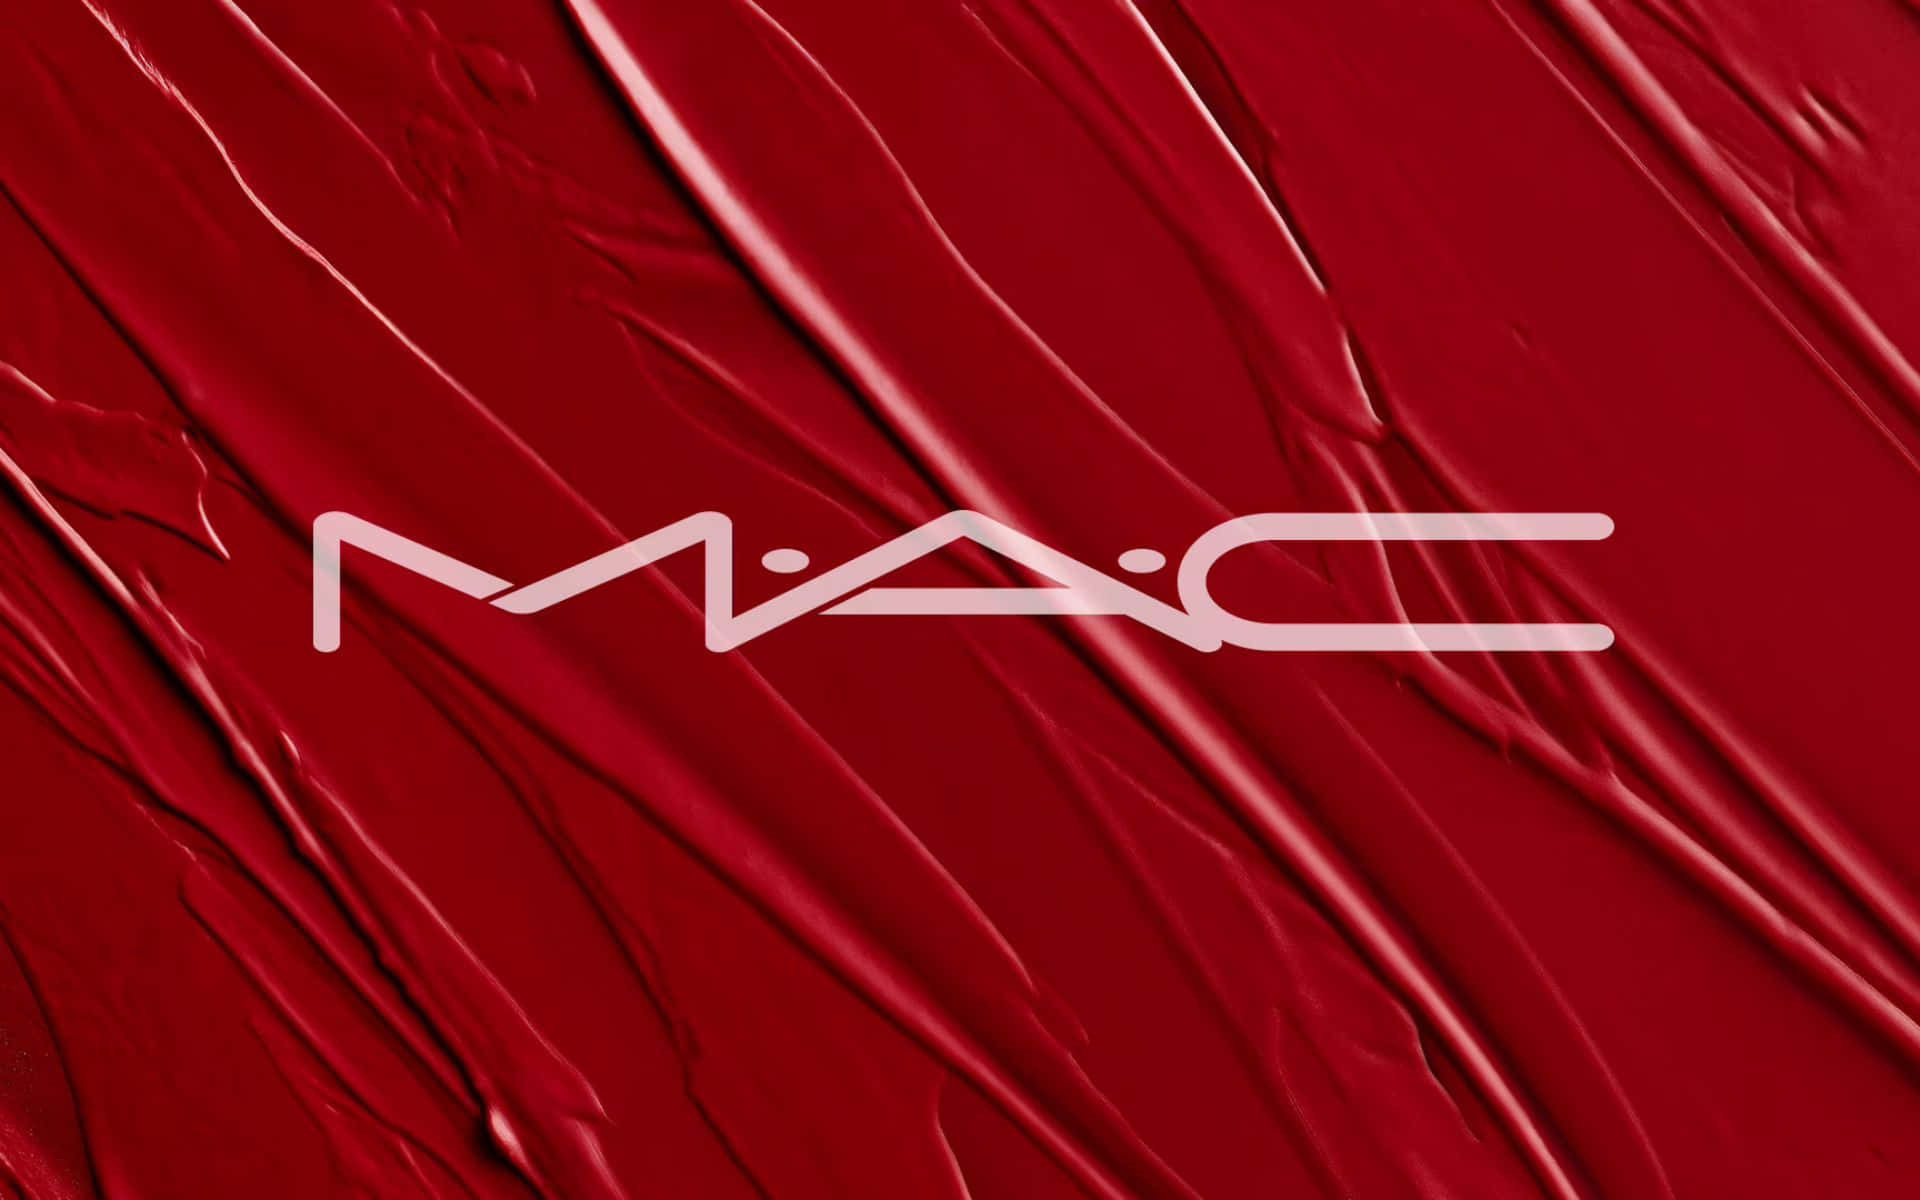 Feel beautiful with Mac Cosmetic’s range of cosmetics and beauty products